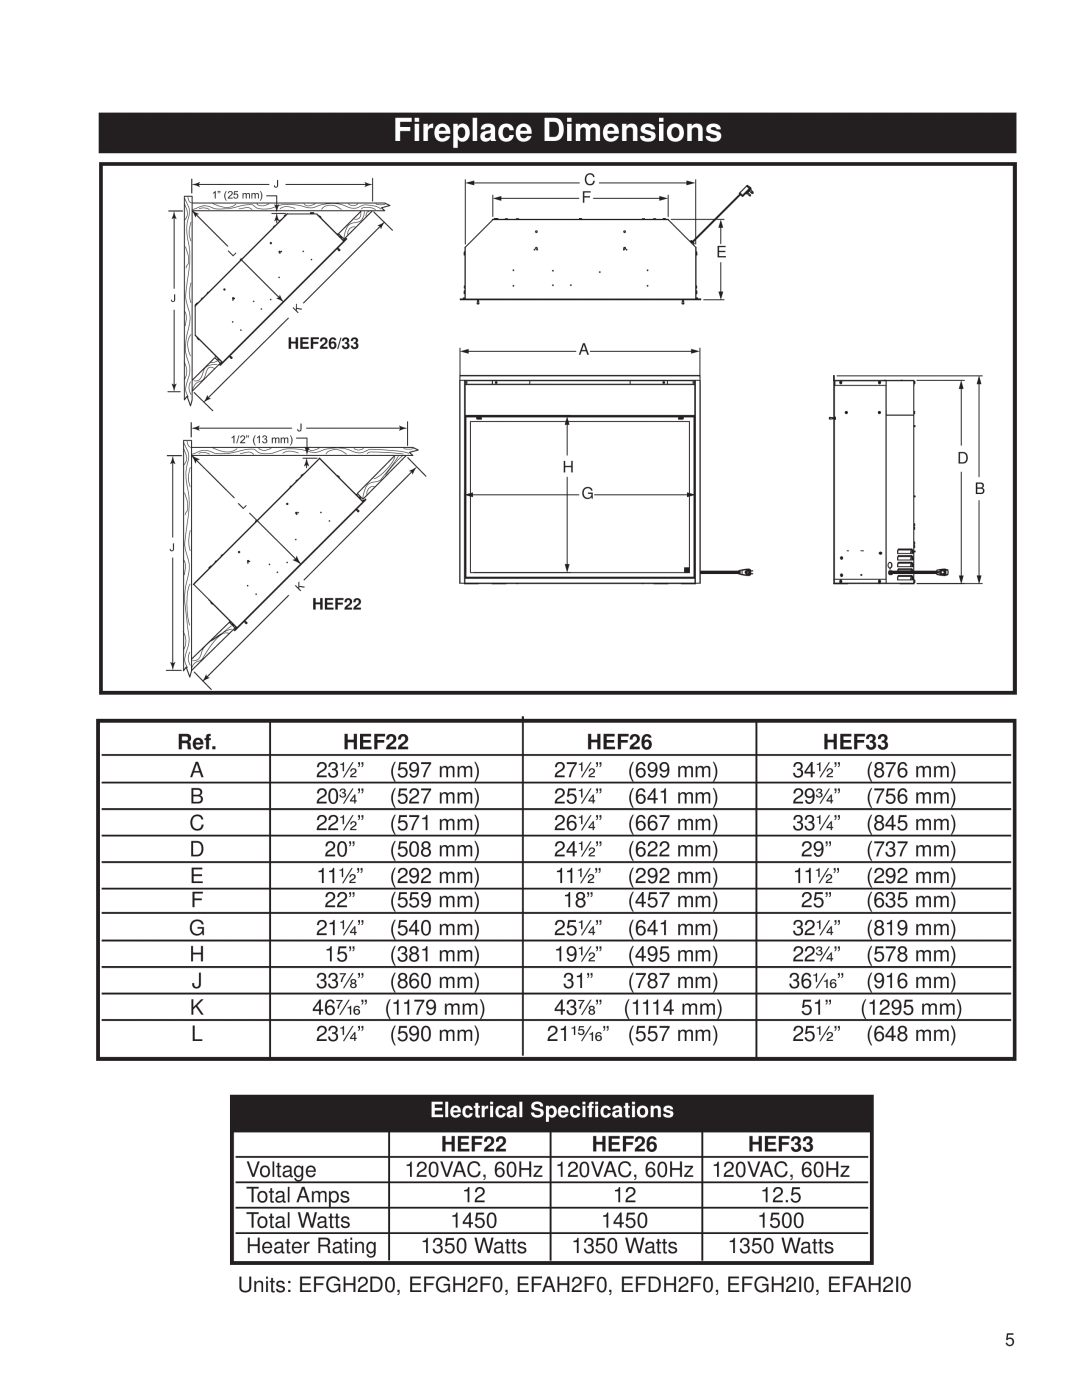 CFM Corporation HEF22 installation instructions Fireplace Dimensions, HEF26, HEF33, Electrical Specifications 